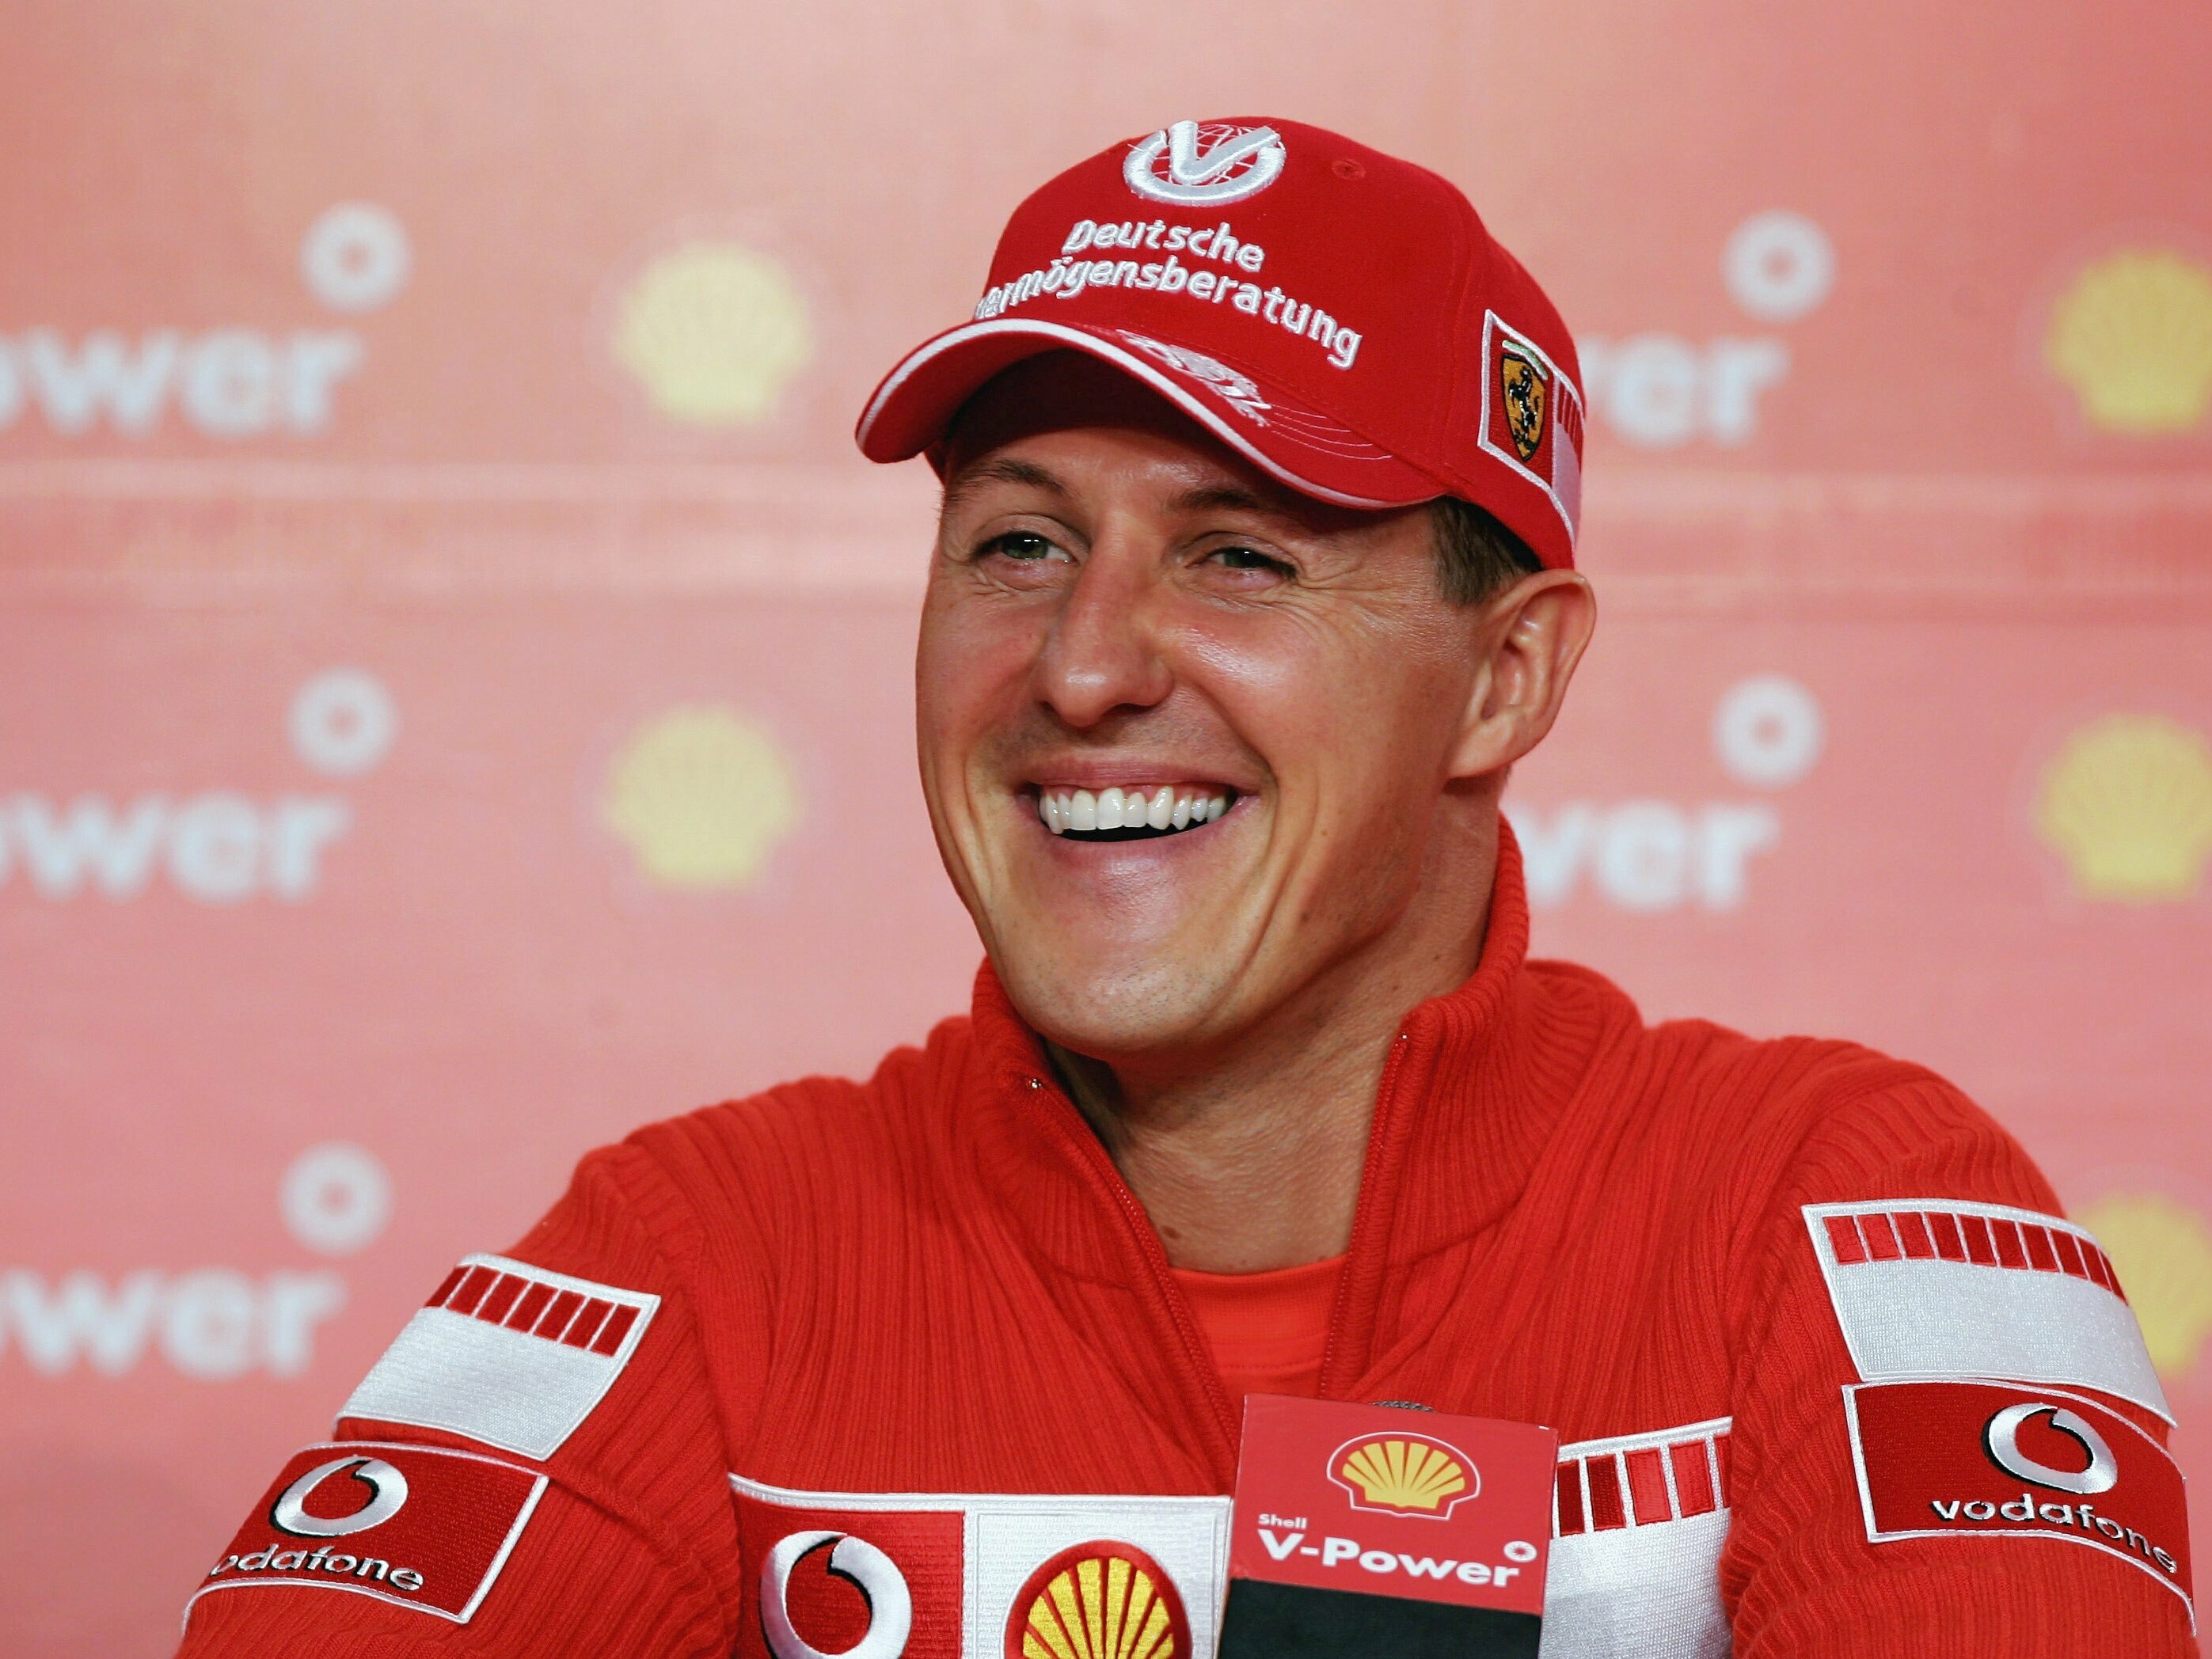 Michael Schumacher's family planning legal action over AI